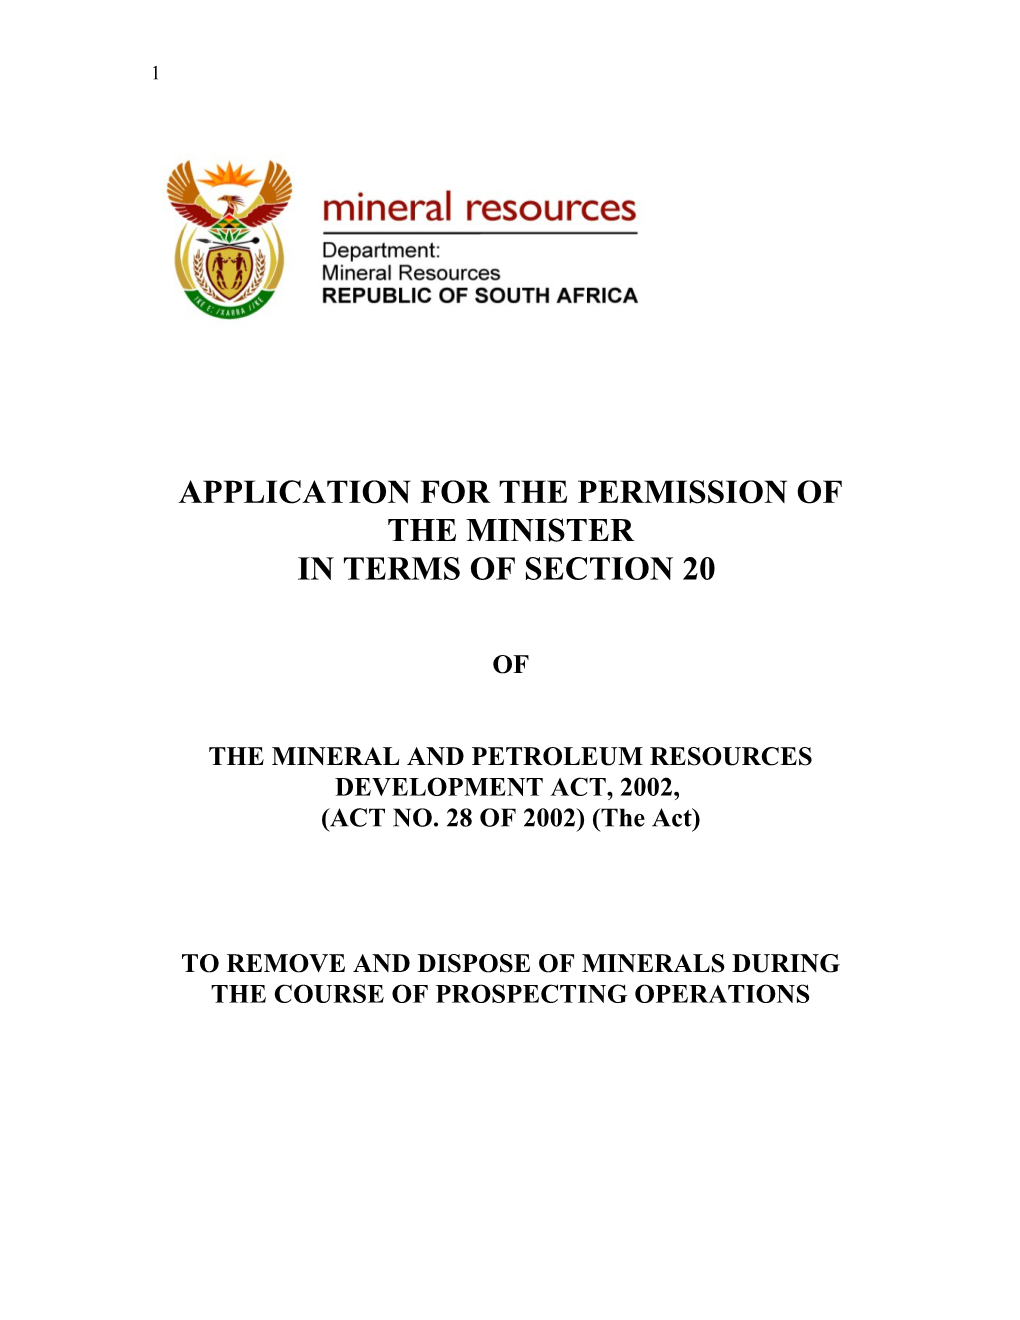 Application for the Permission of the Minister